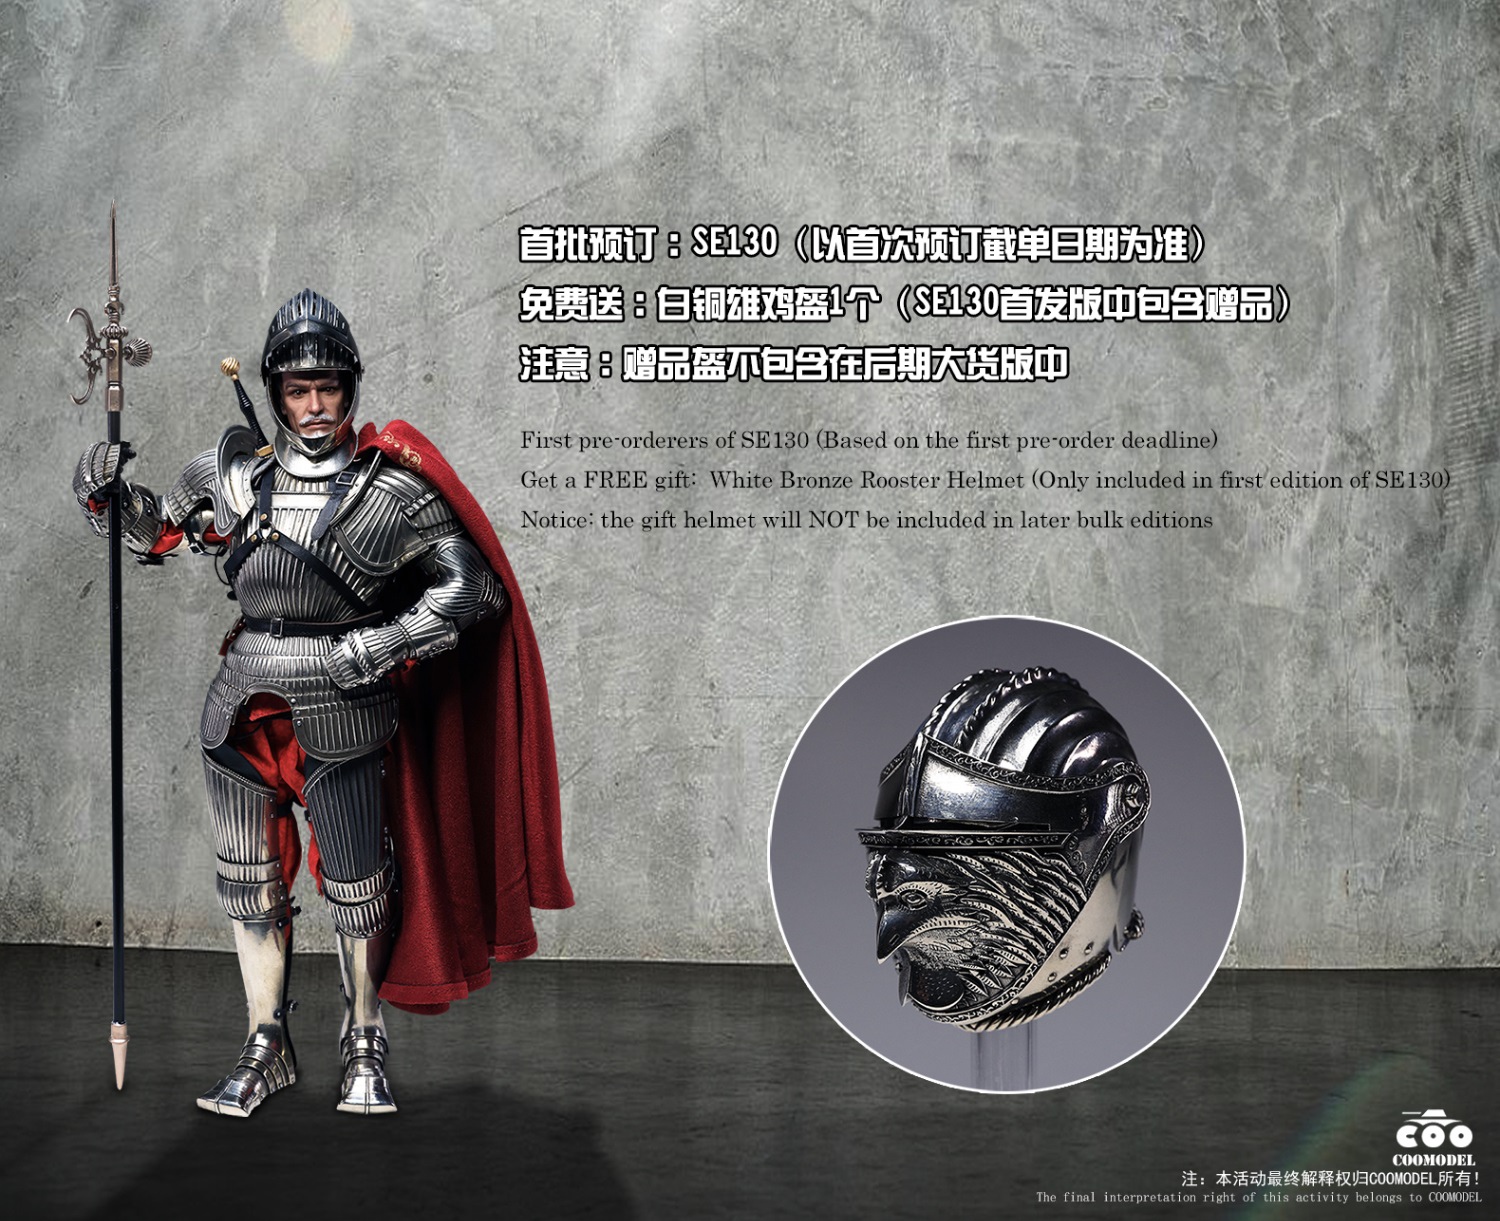 NEW PRODUCT: COOMODEL - Empire Series - Holy Empire Knight (White Bronze Commemorative Edition) SE130 16162